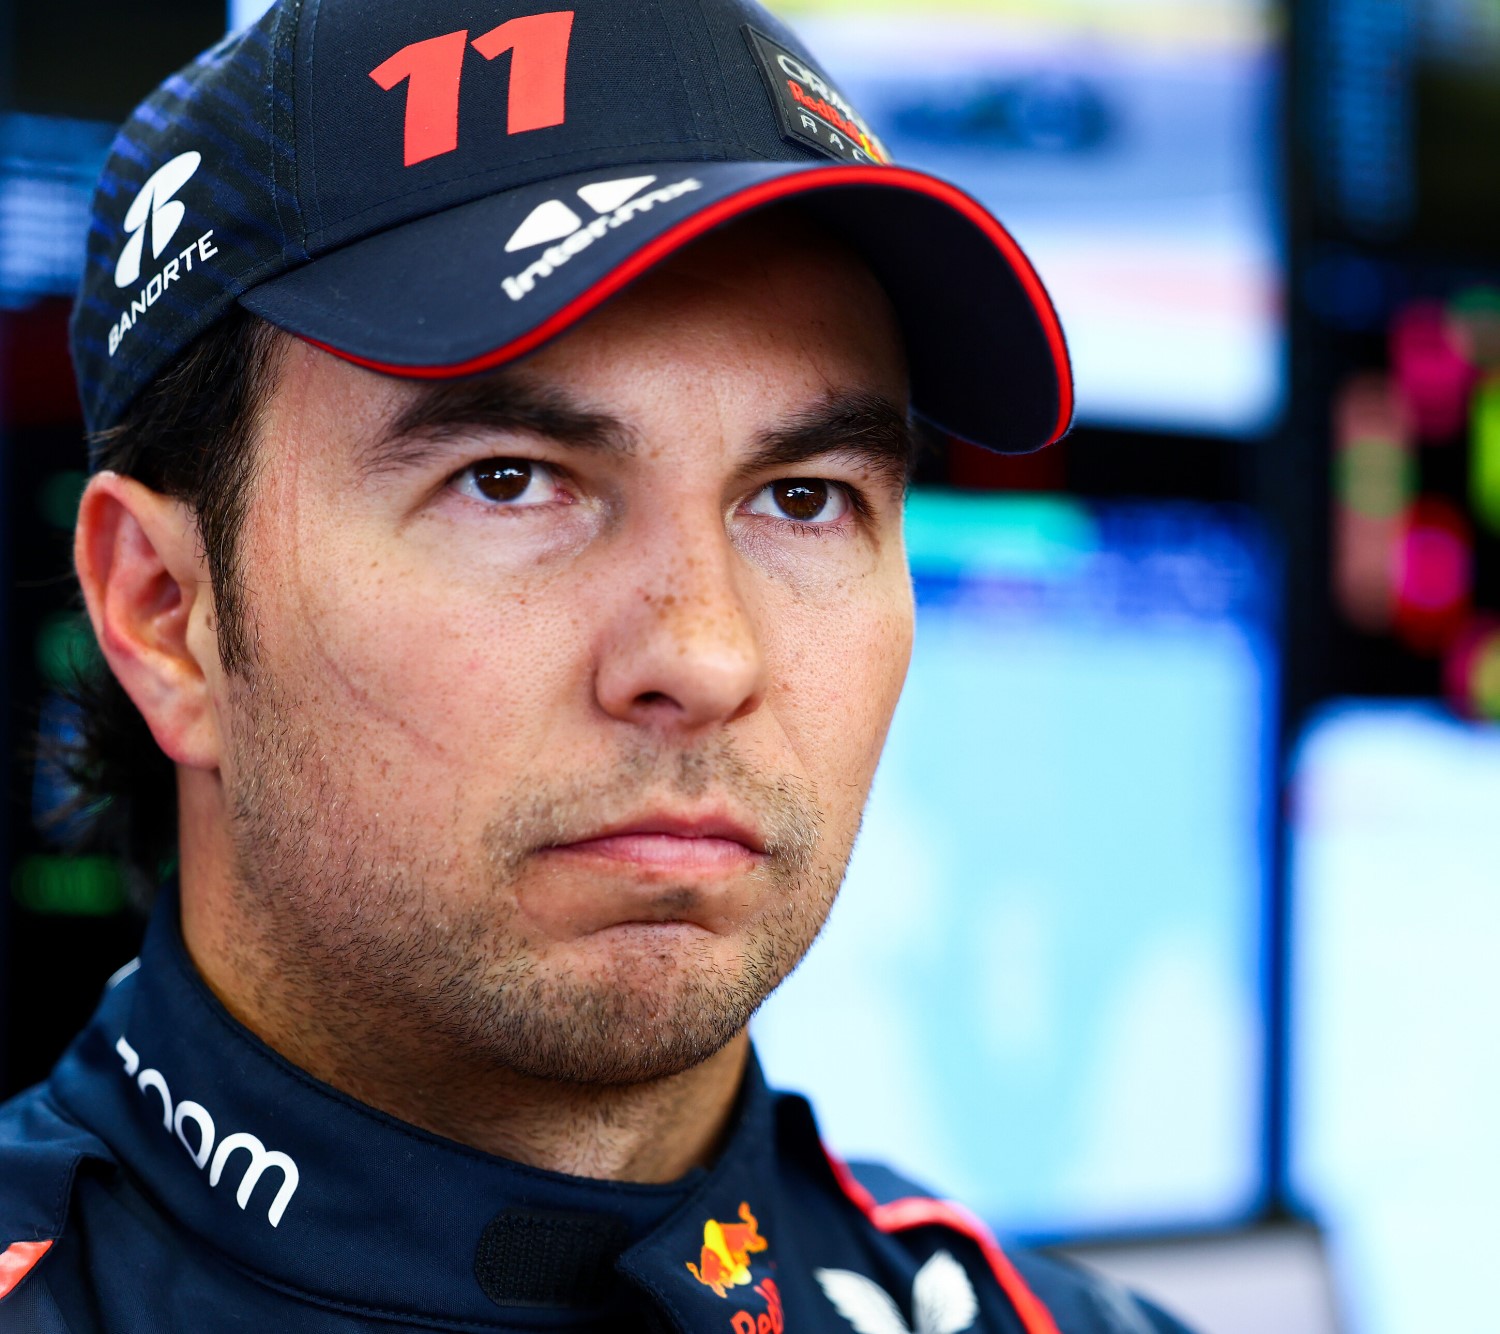 Facing the reality, he simply is not as talented as Max Verstappen, a Stoic Sergio Perez of Mexico and Oracle Red Bull Racing looks on in the garage. (Photo by Mark Thompson/Getty Images) // Getty Images / Red Bull Content Pool